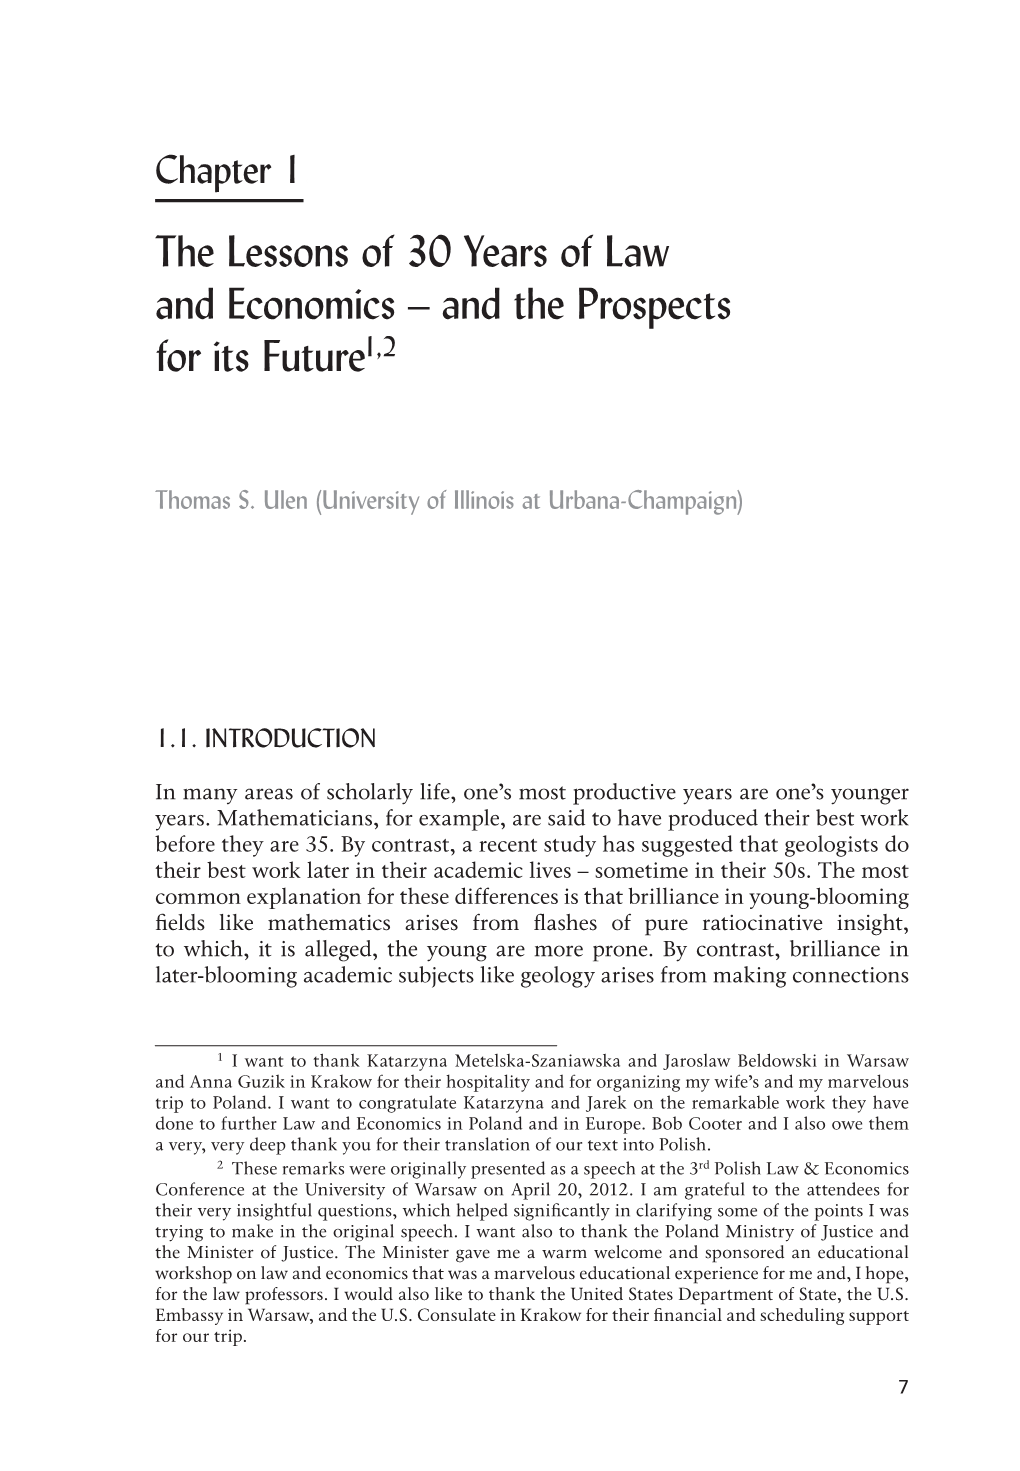 The Lessons of 30 Years of Law and Economics – and the Prospects for Its Future1,2